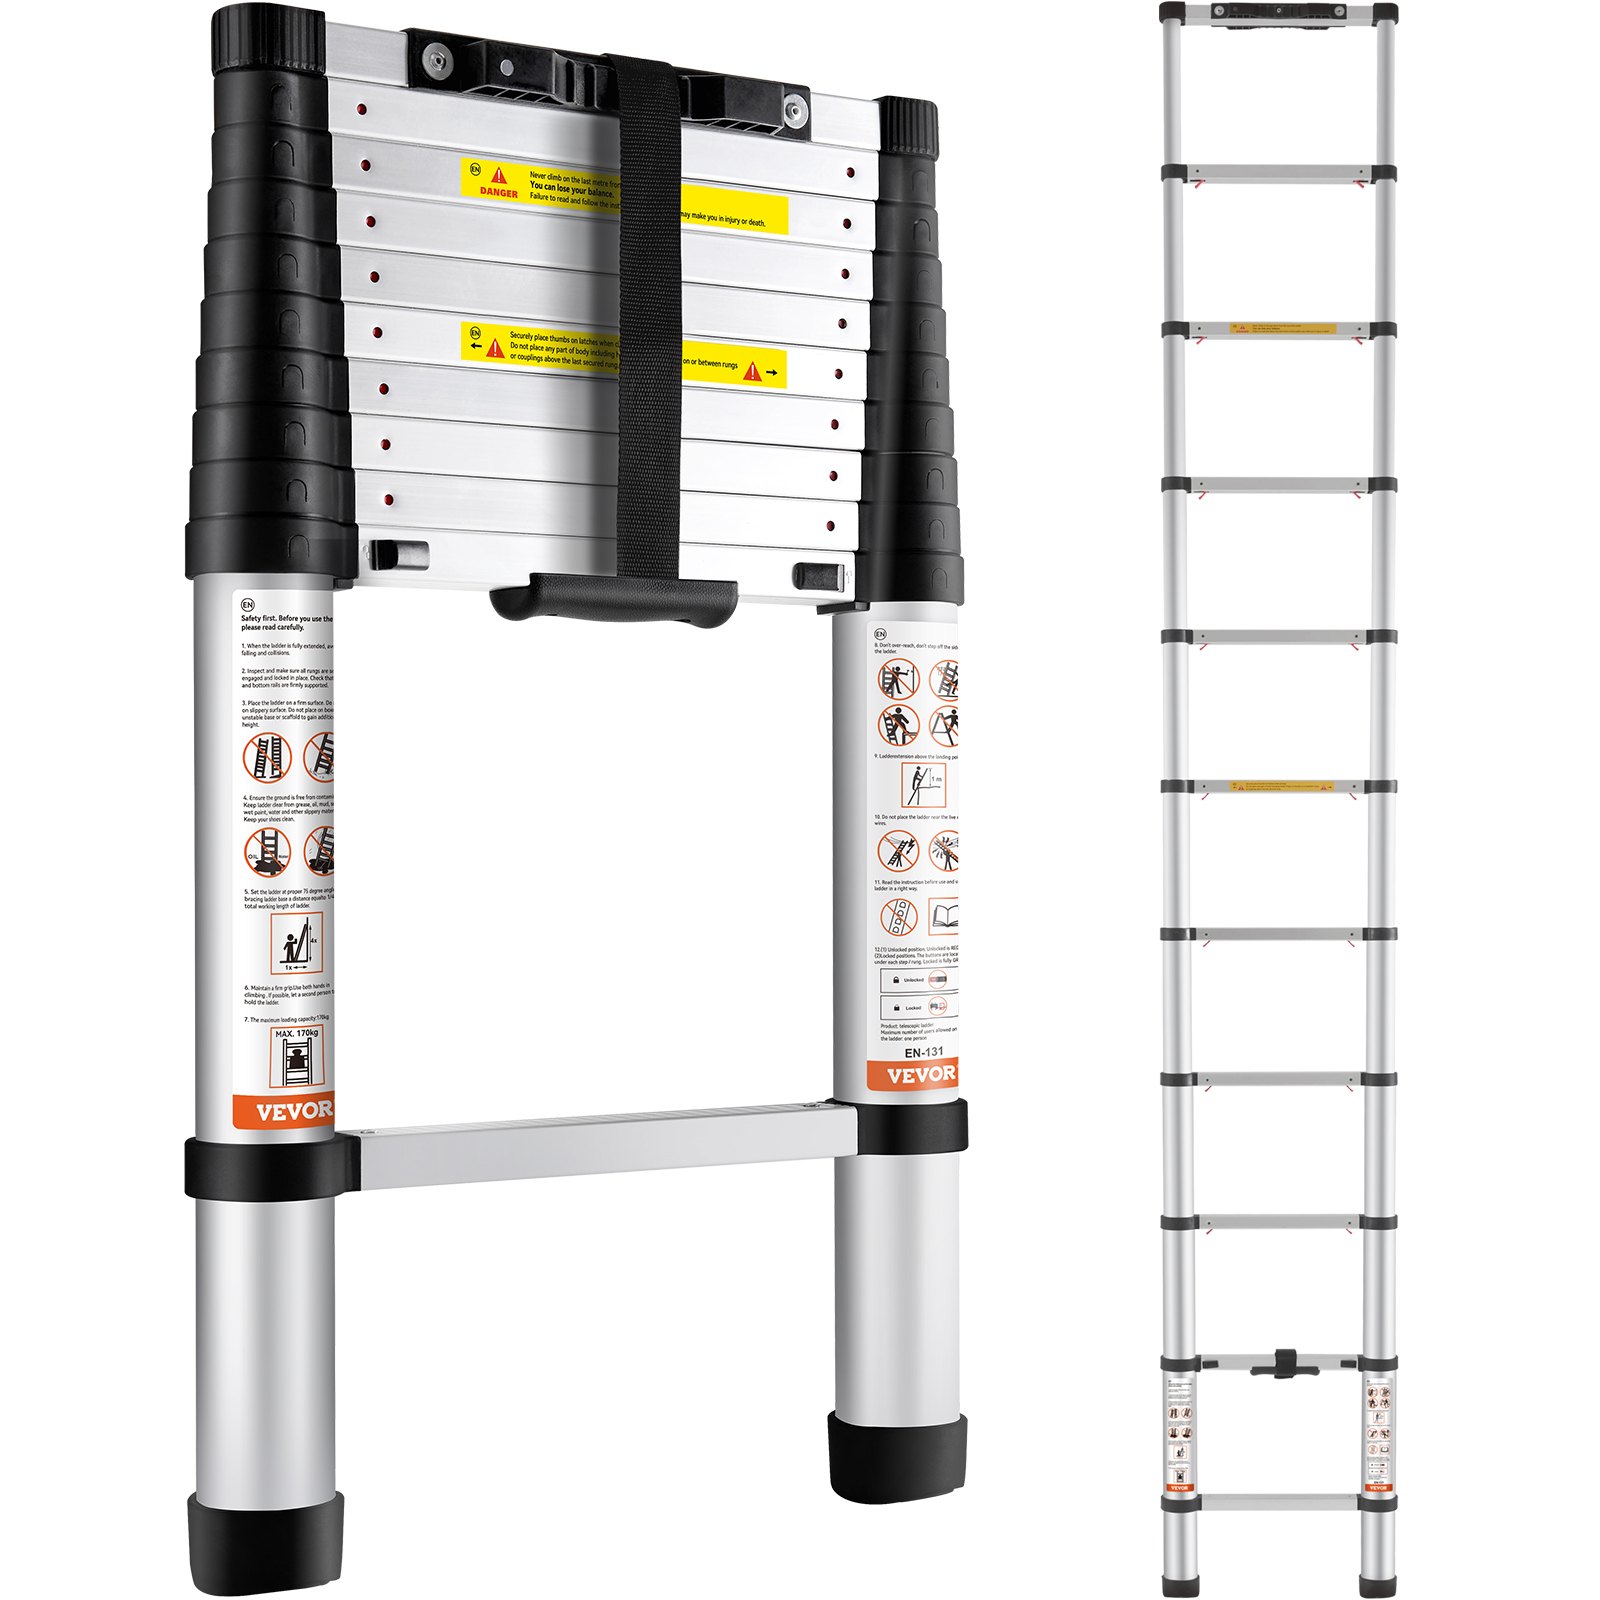 You can even reach the moon with the VEVOR extendable ladder